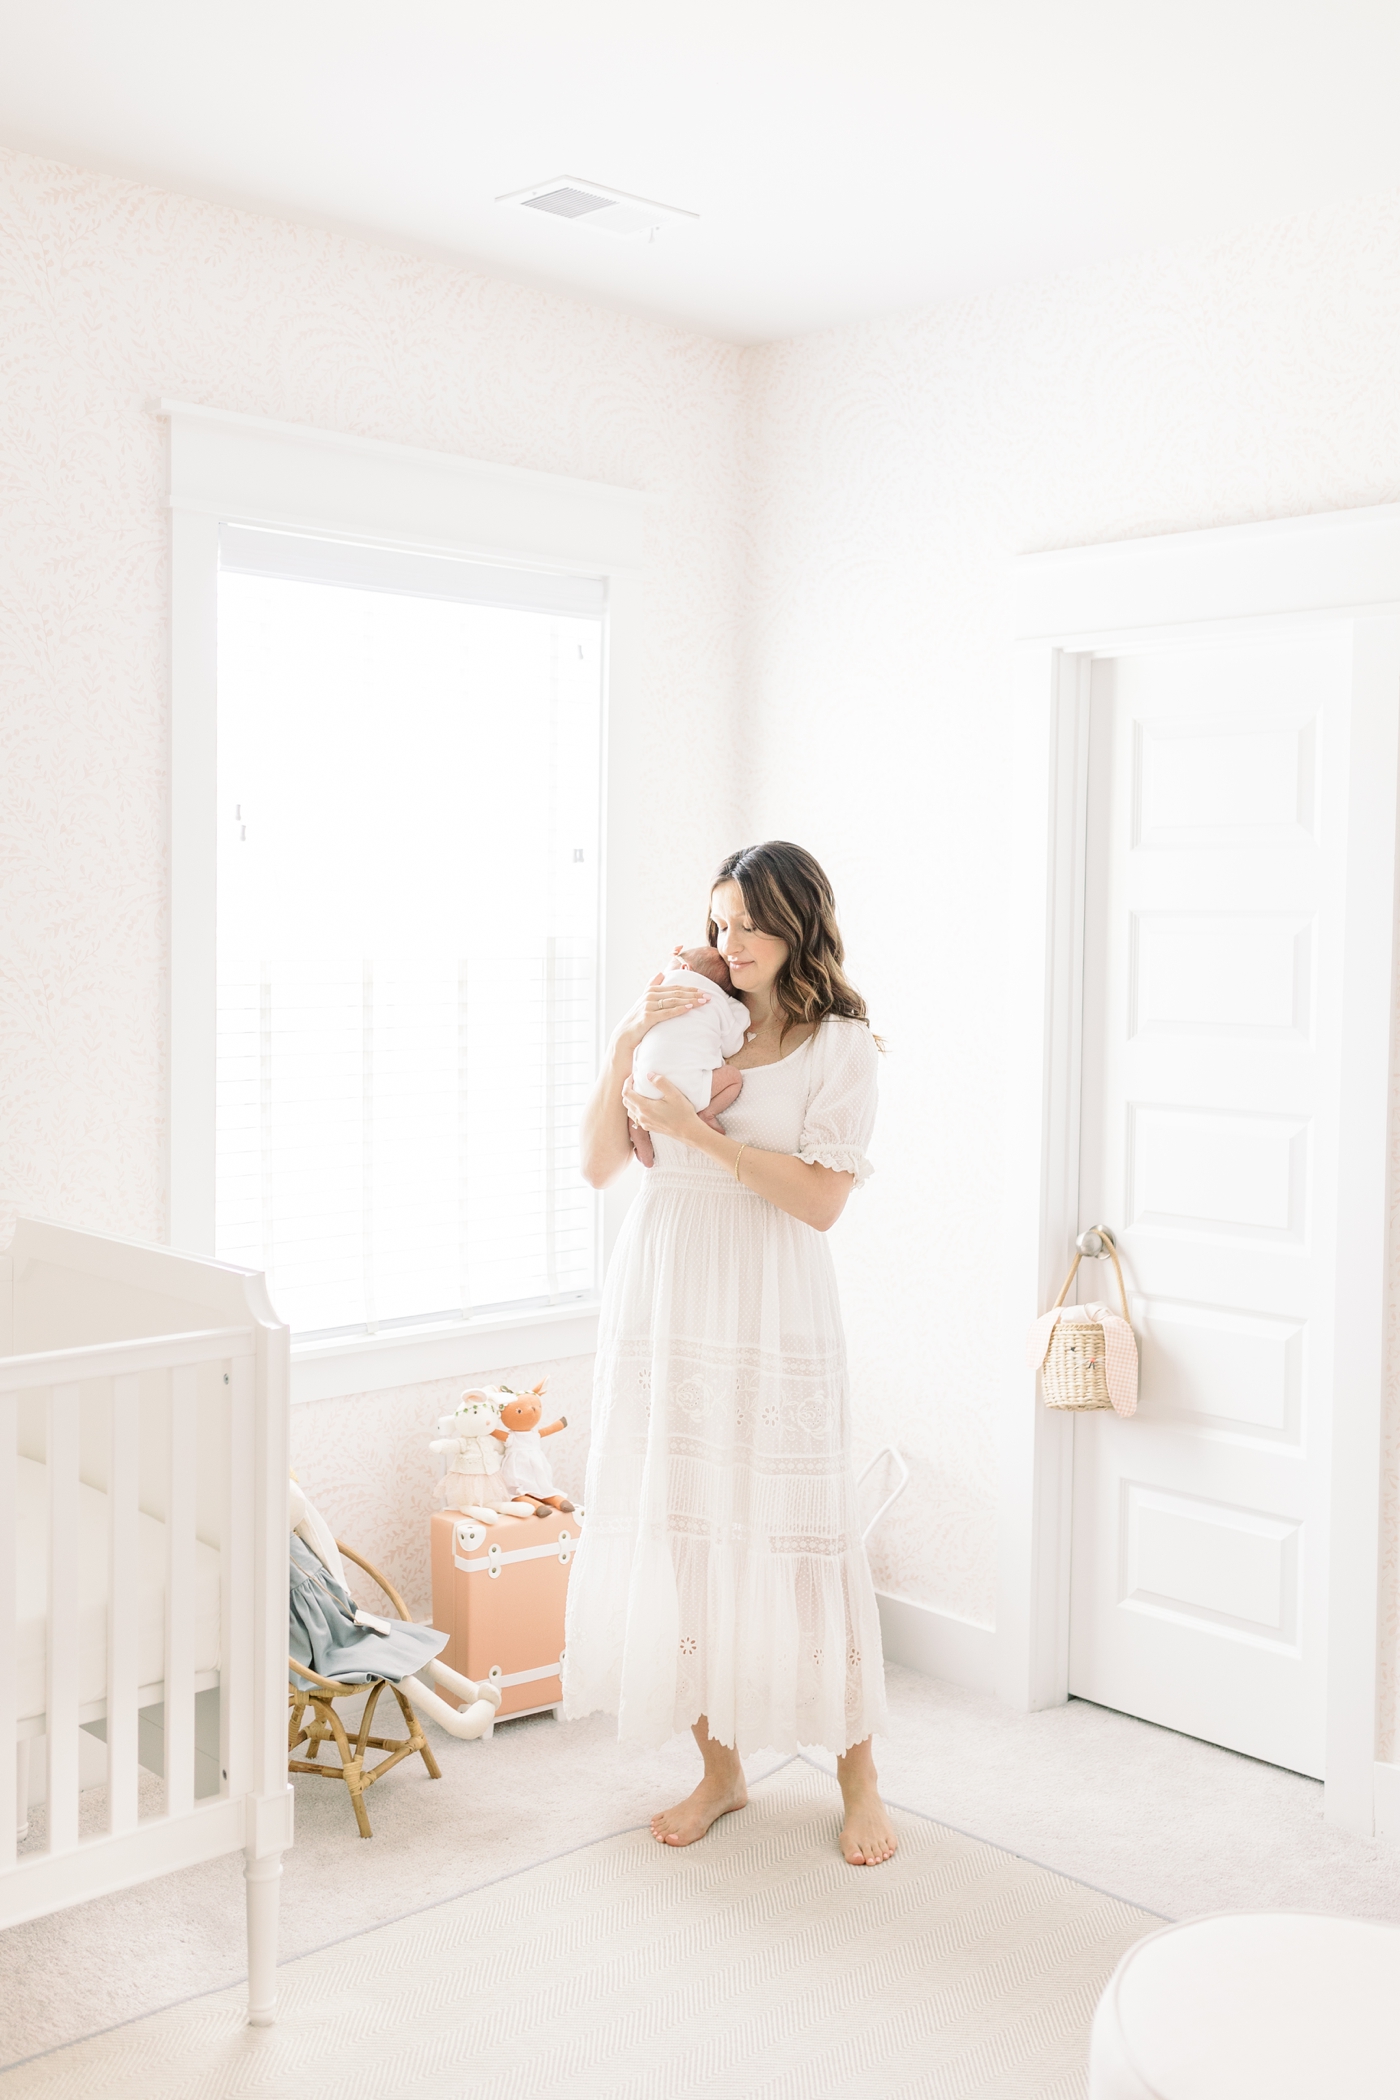 Mom holding her newborn in her nursery | Photo by Caitlyn Motycka Photography.